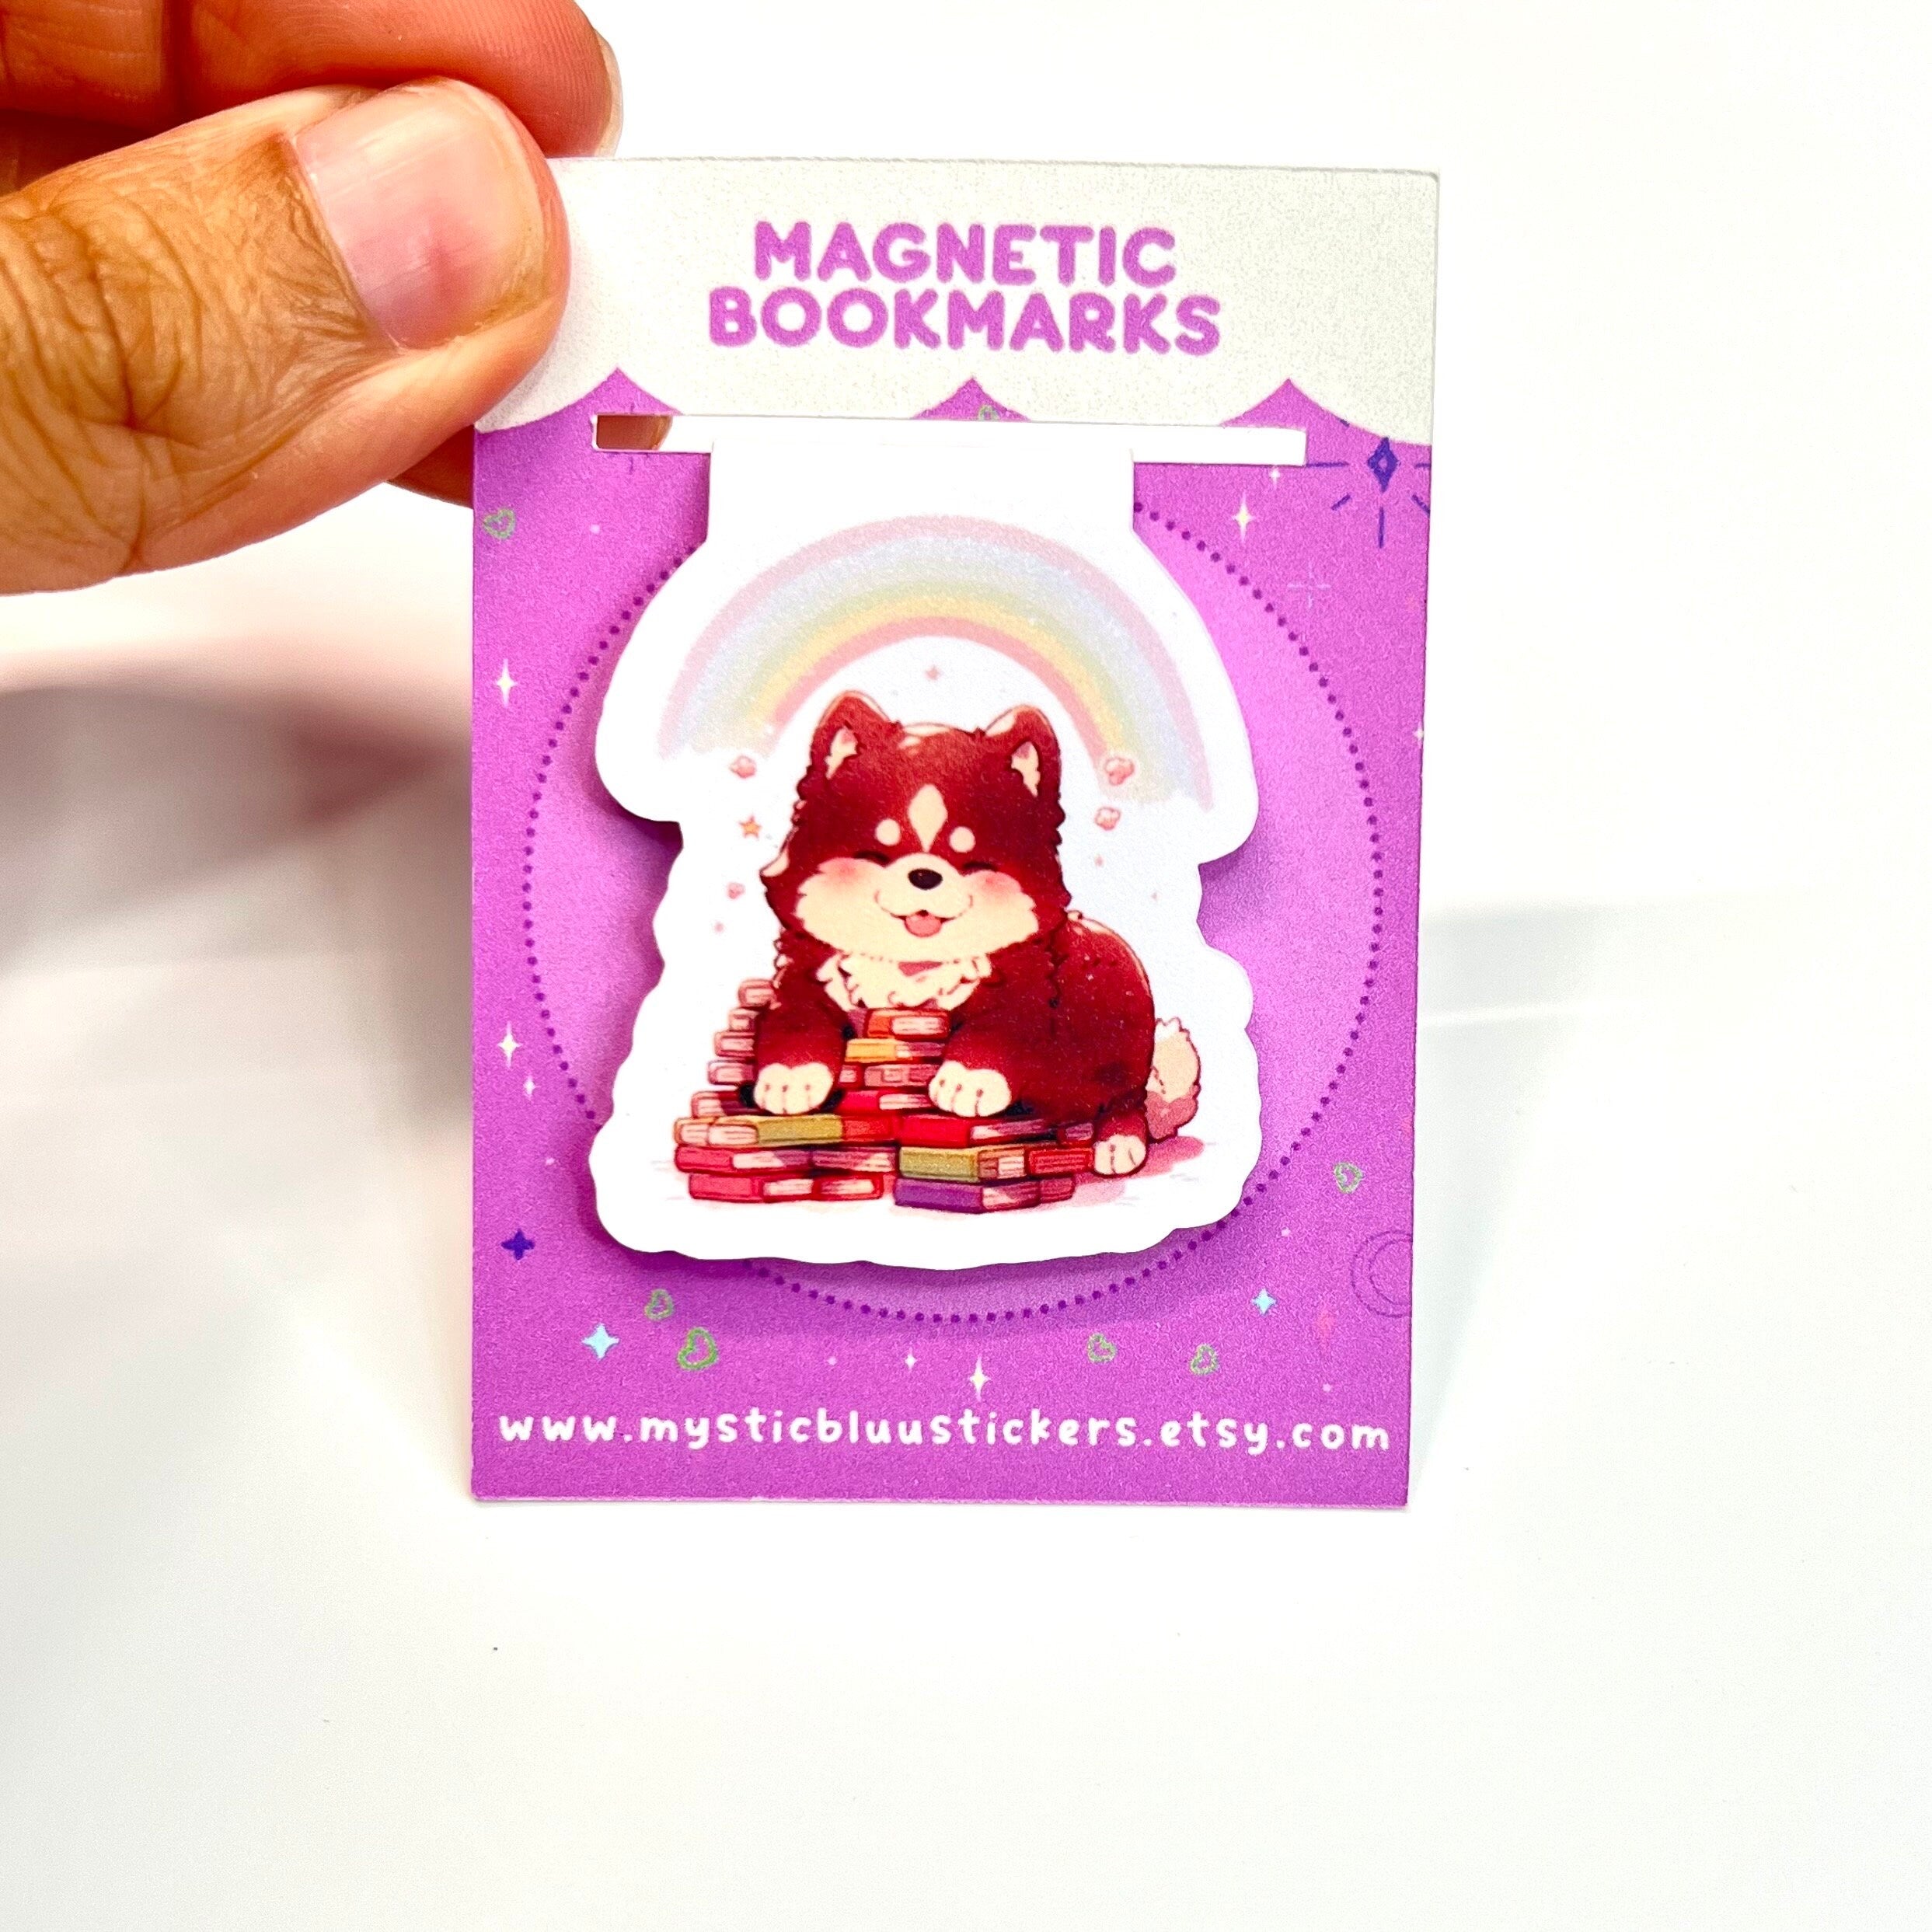 Dog Sitting on Books Magnetic Bookmark, for women, Bookish, Holographic, birthday gift for her, book lover, book accessories, booktok